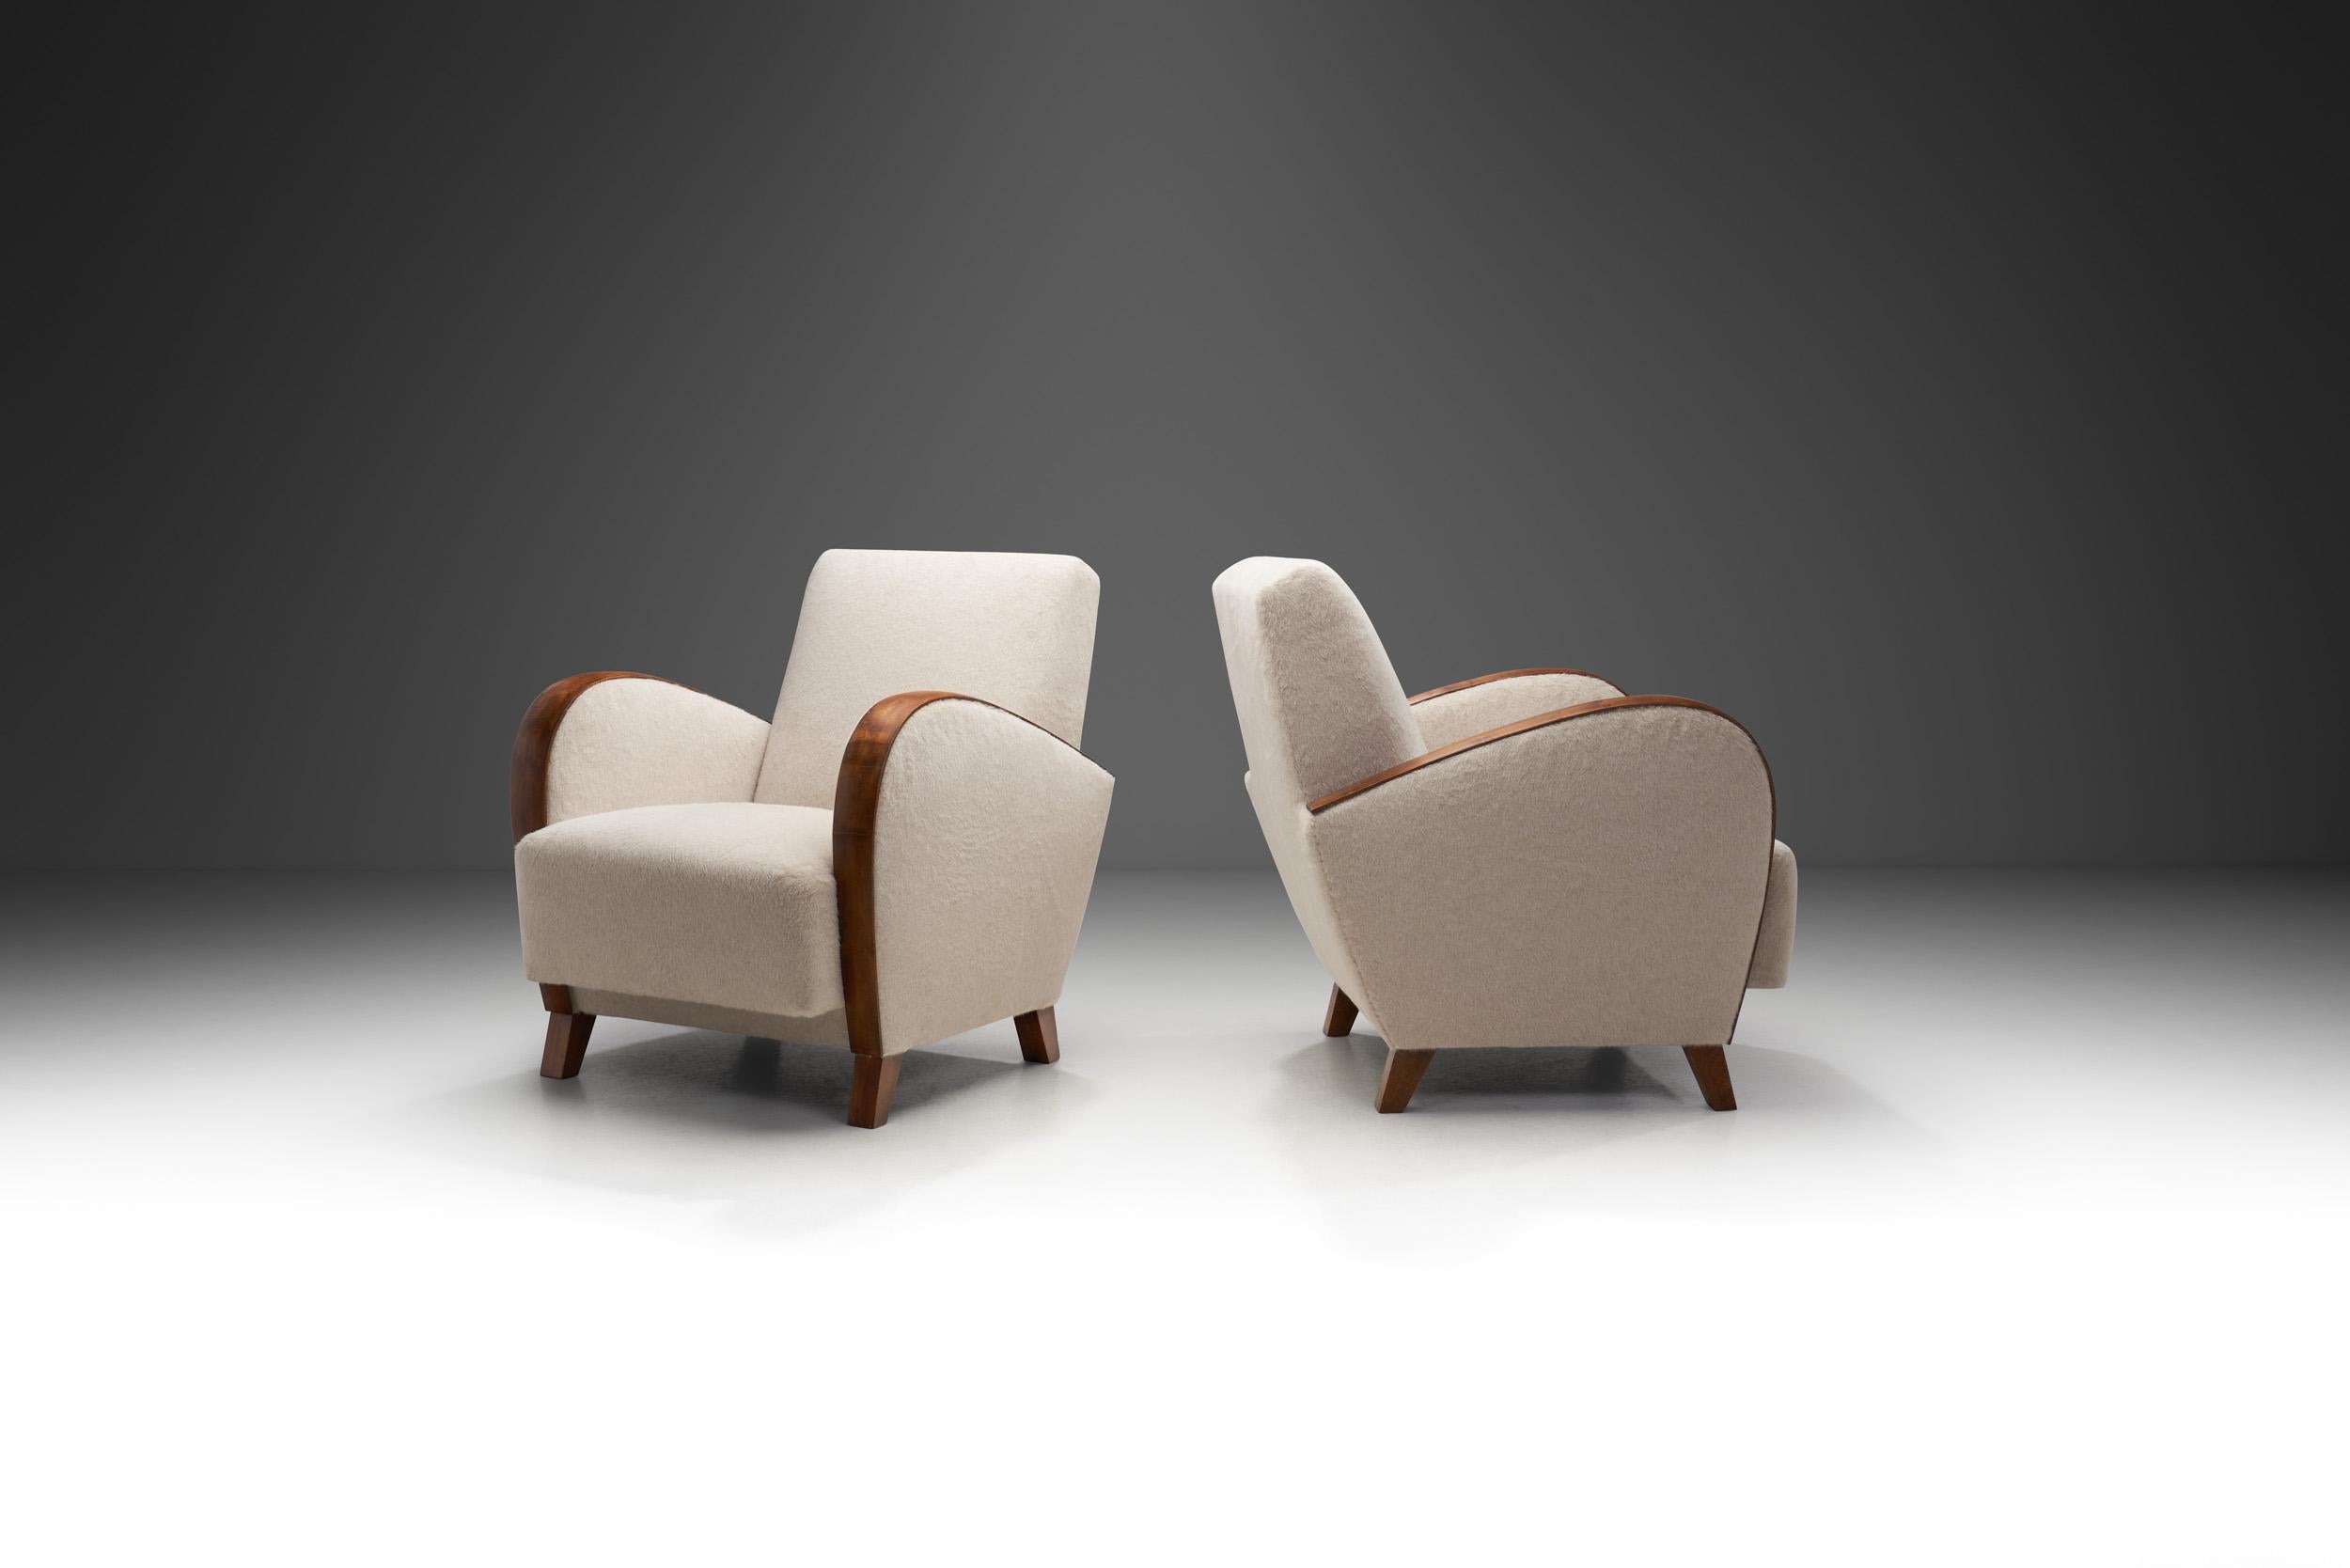 Mid-Century Modern A Pair of Reupholstered Funkis Armchairs by Axel Einar Hjorth, Sweden 1930s.